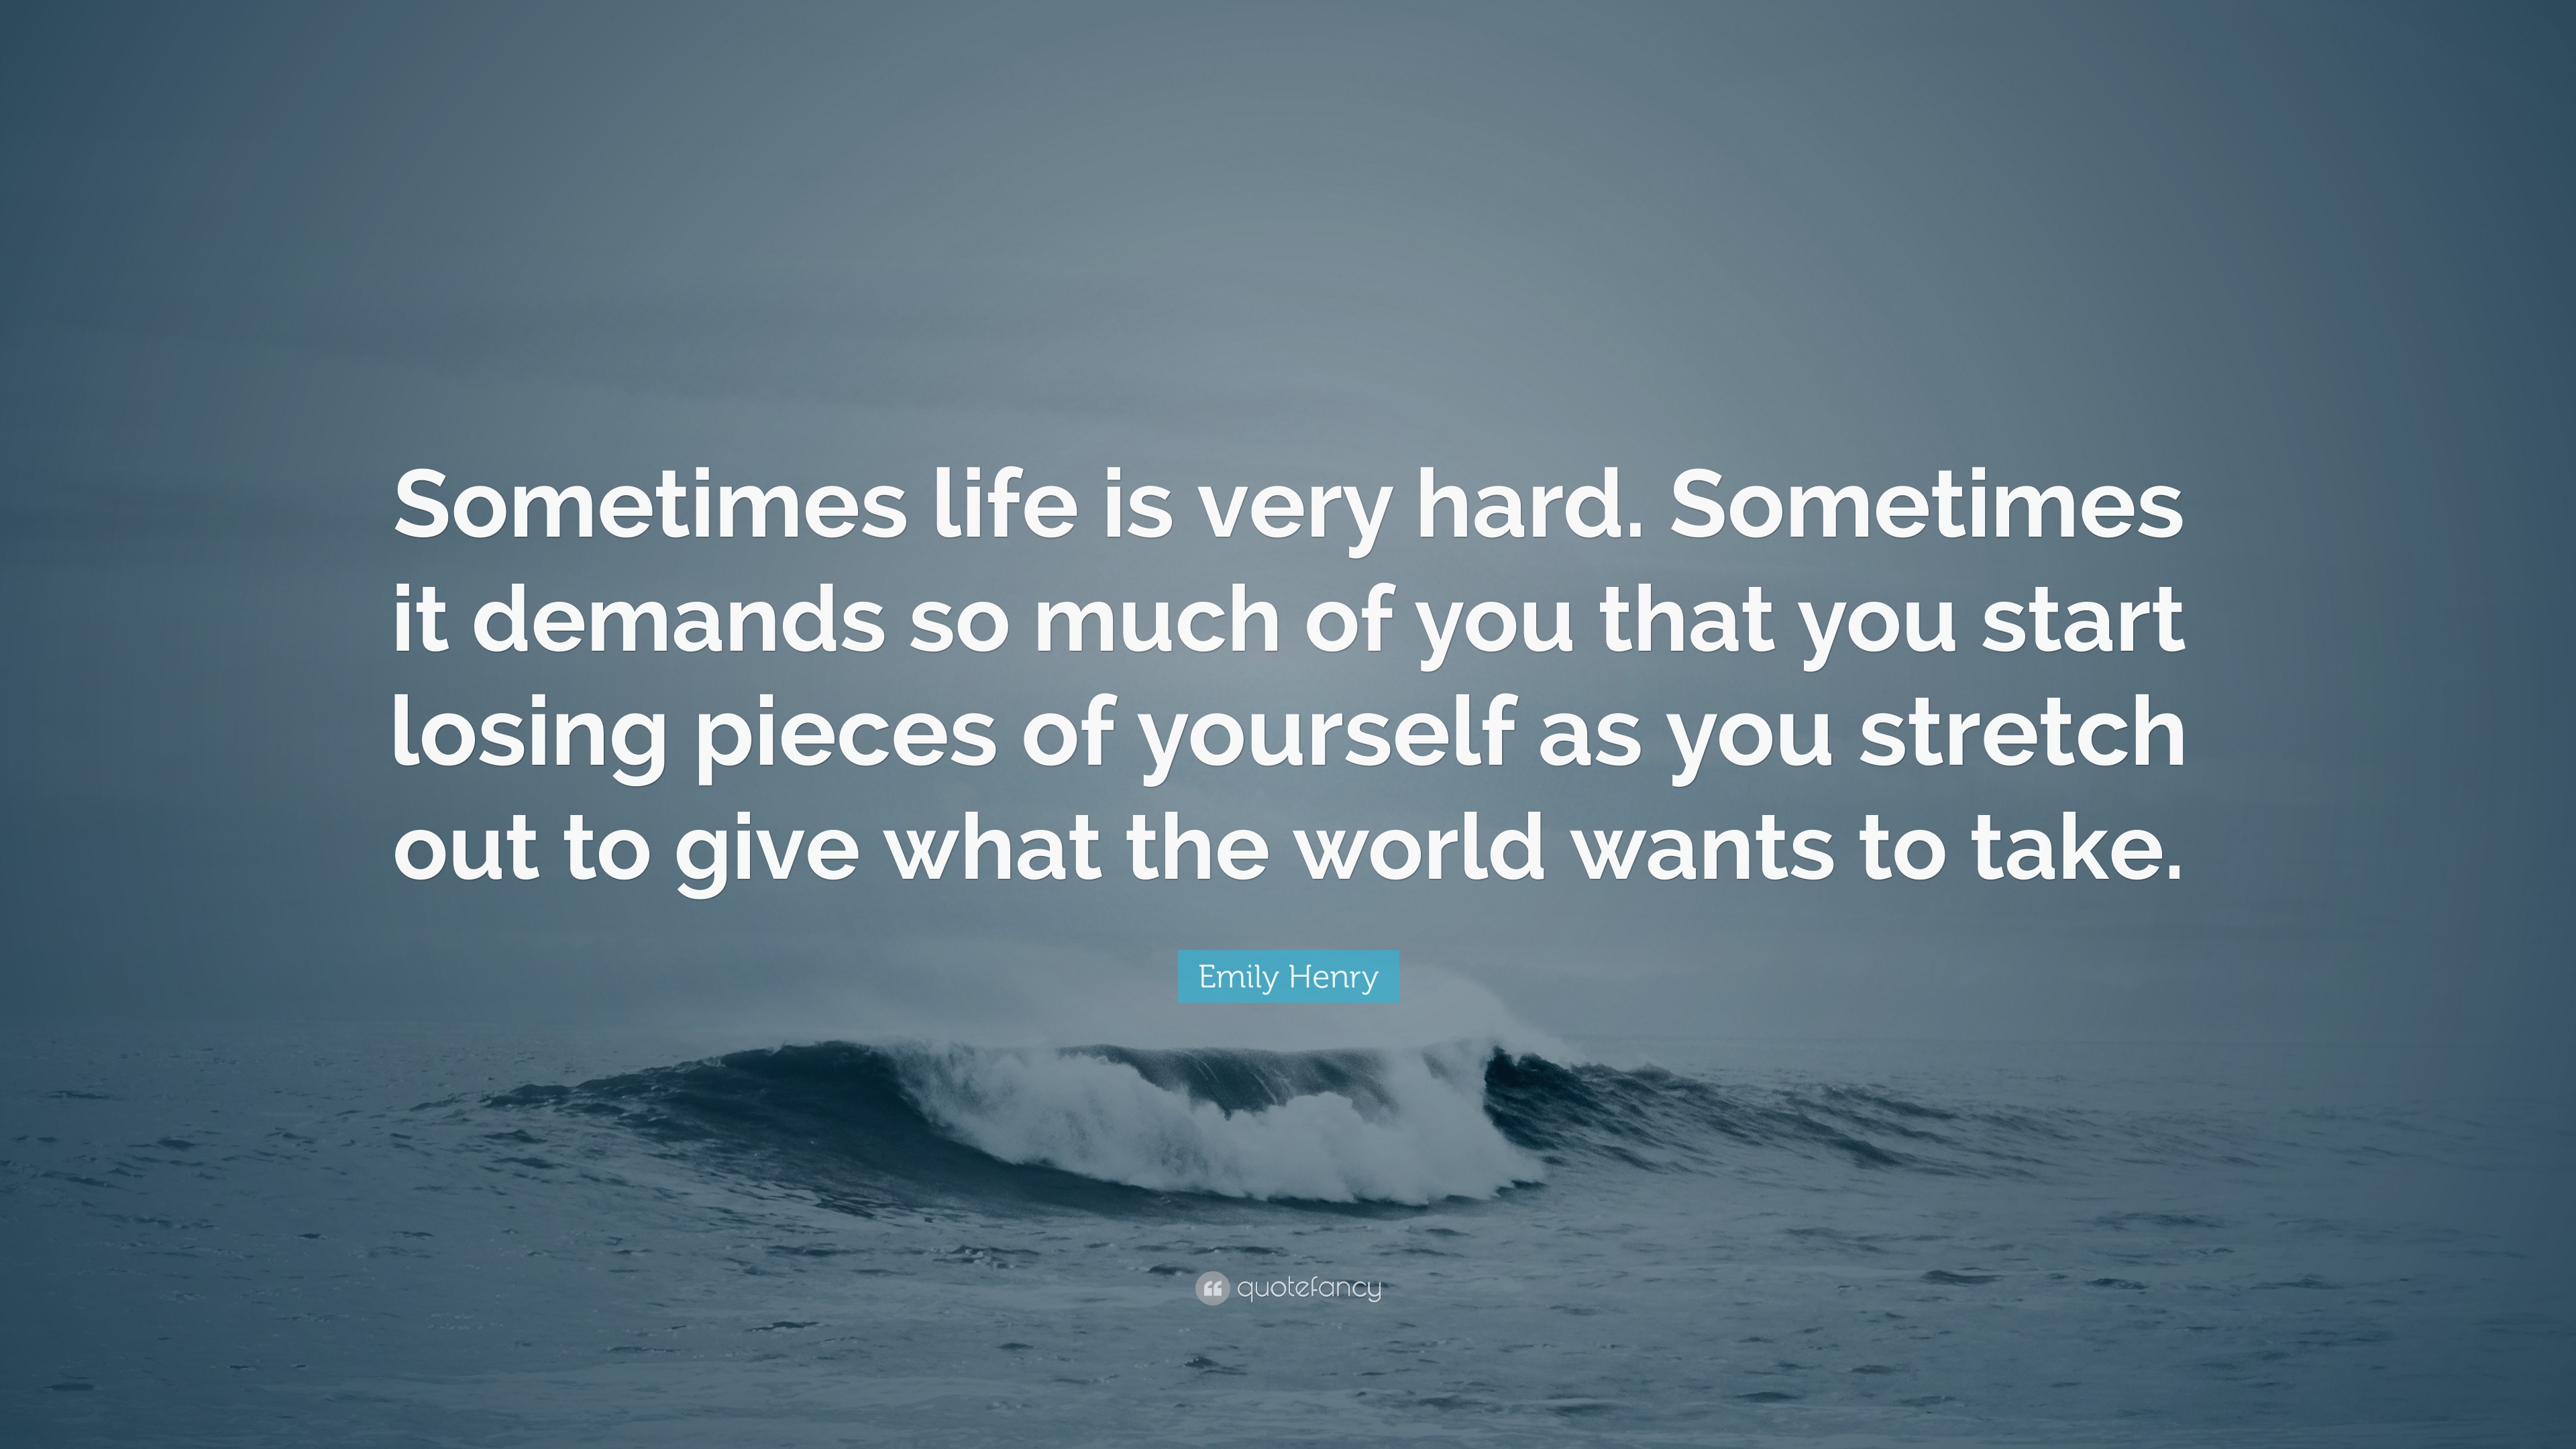 Emily Henry Quote: “Sometimes life is very hard. Sometimes it demands so  much of you that you start losing pieces of yourself as you stretch”